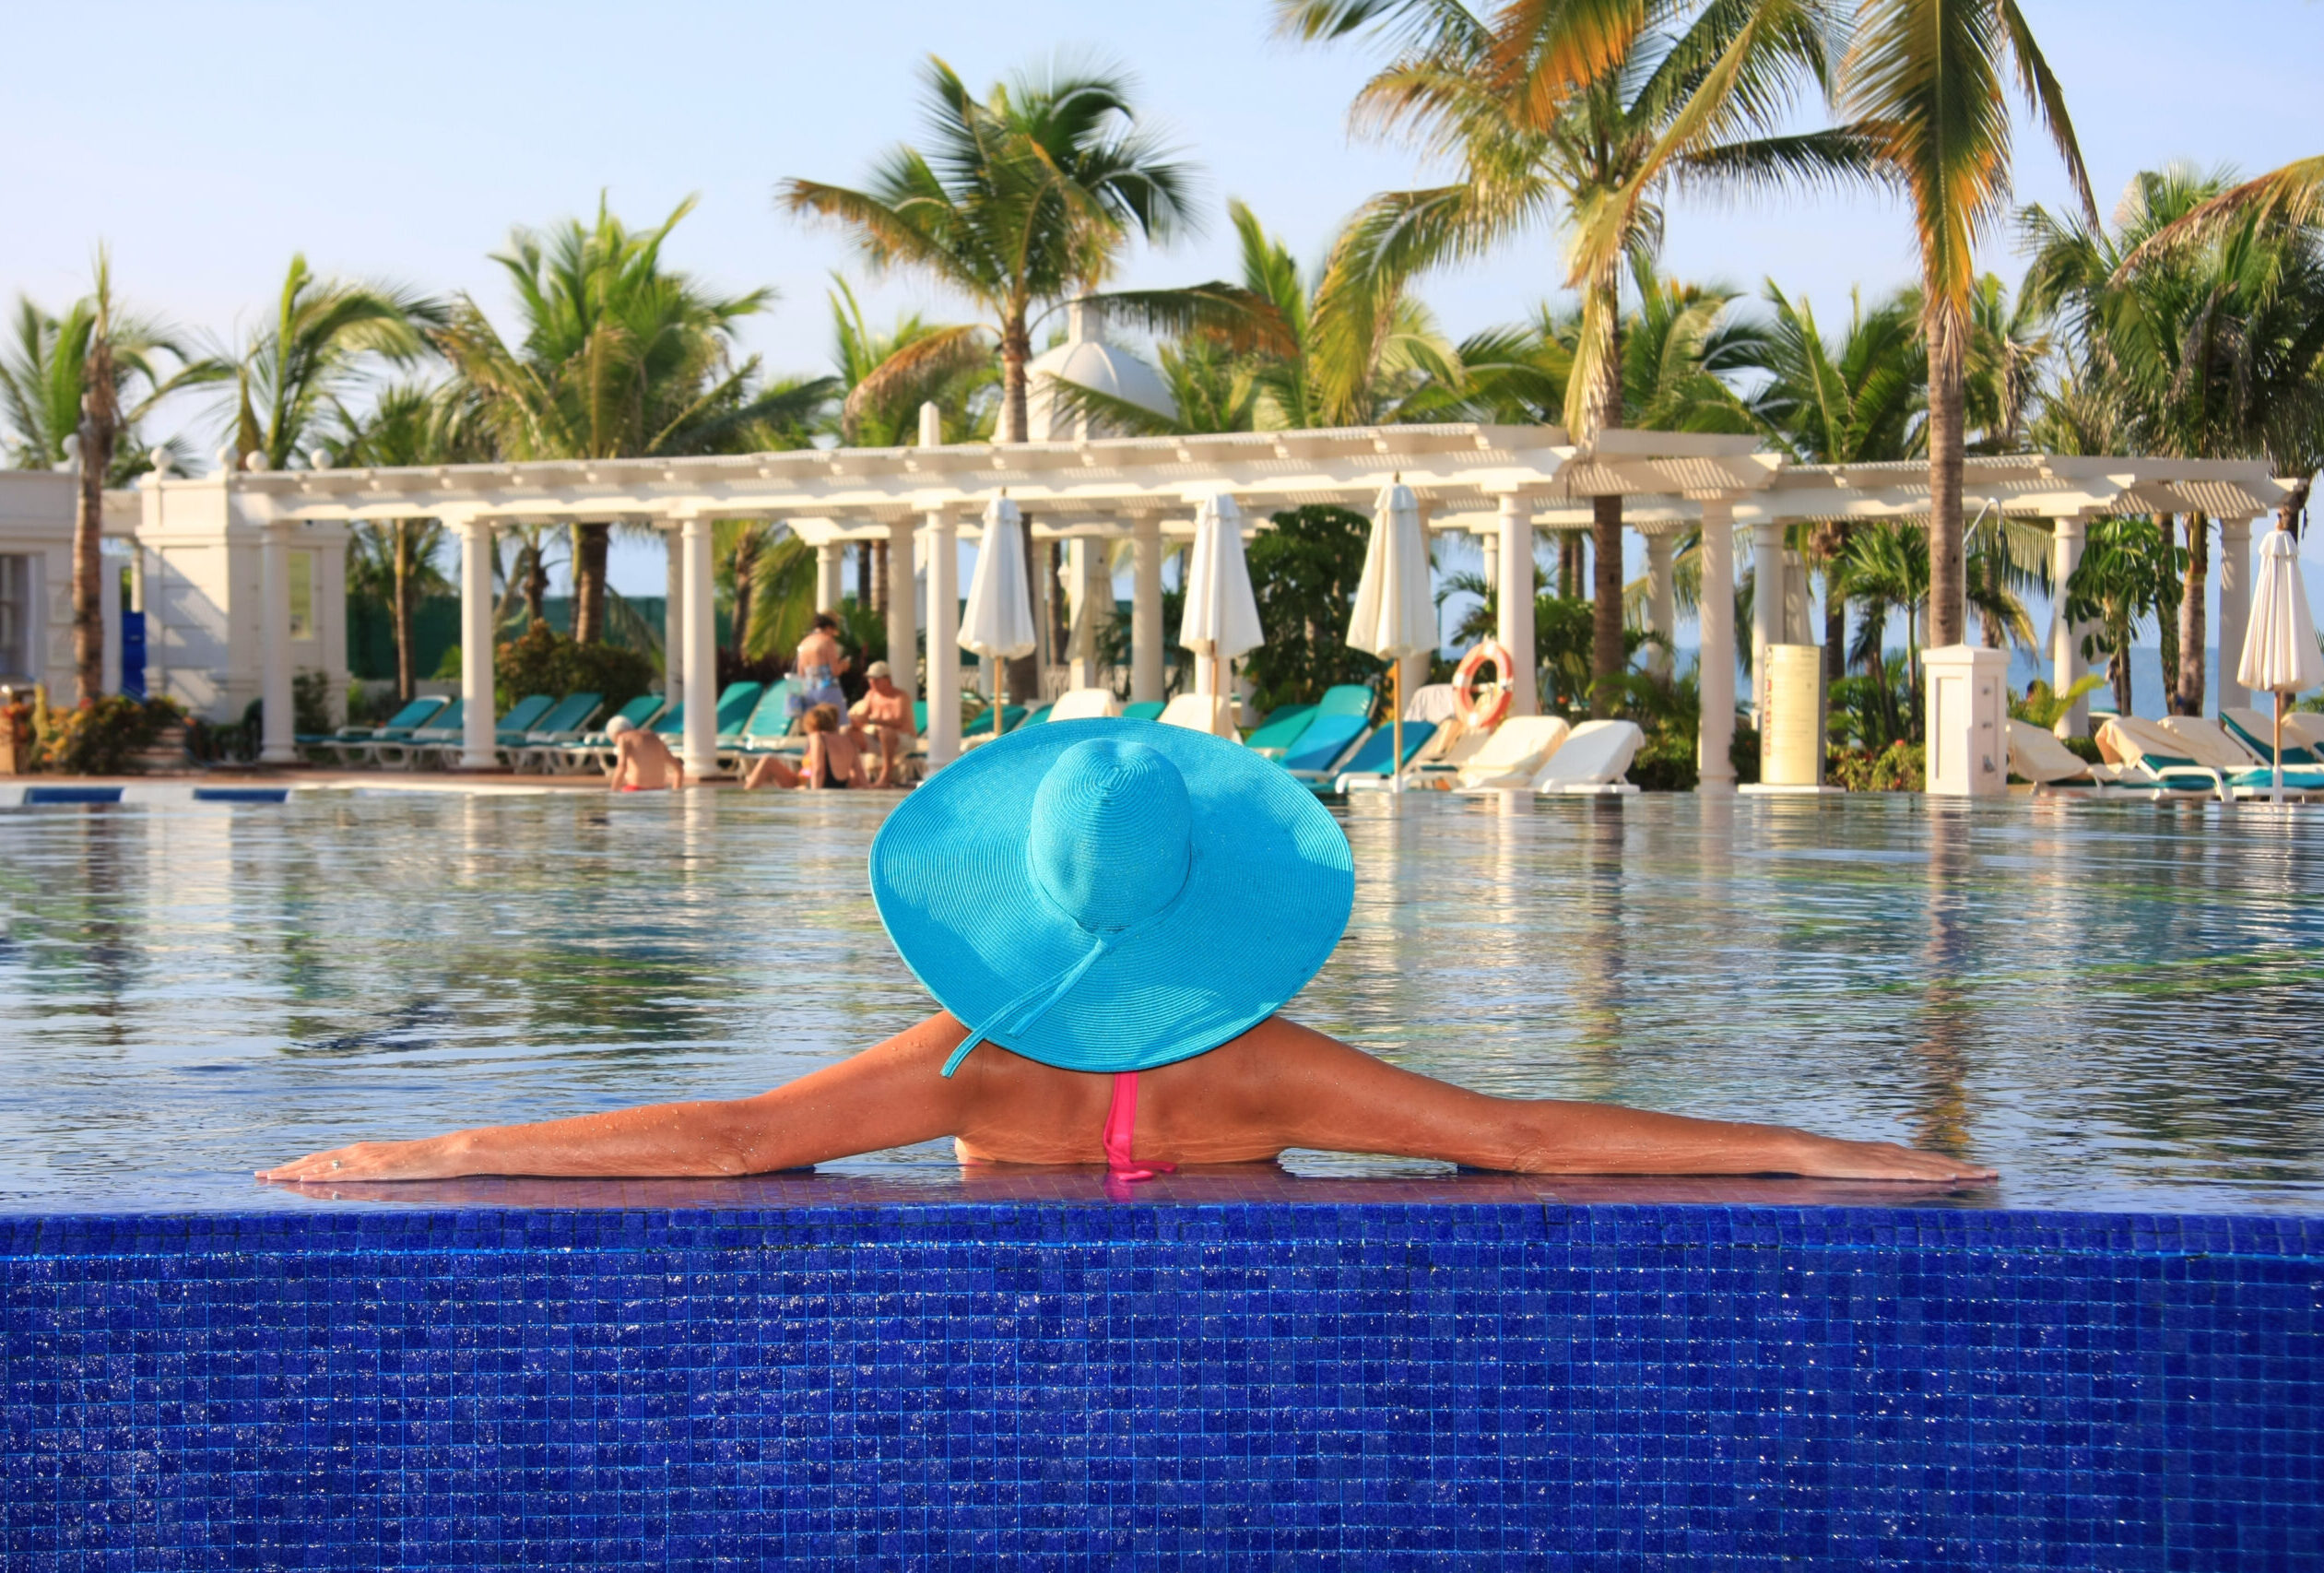 Woman in a sunhat relaxing in a pool at an all-inclusive resort.